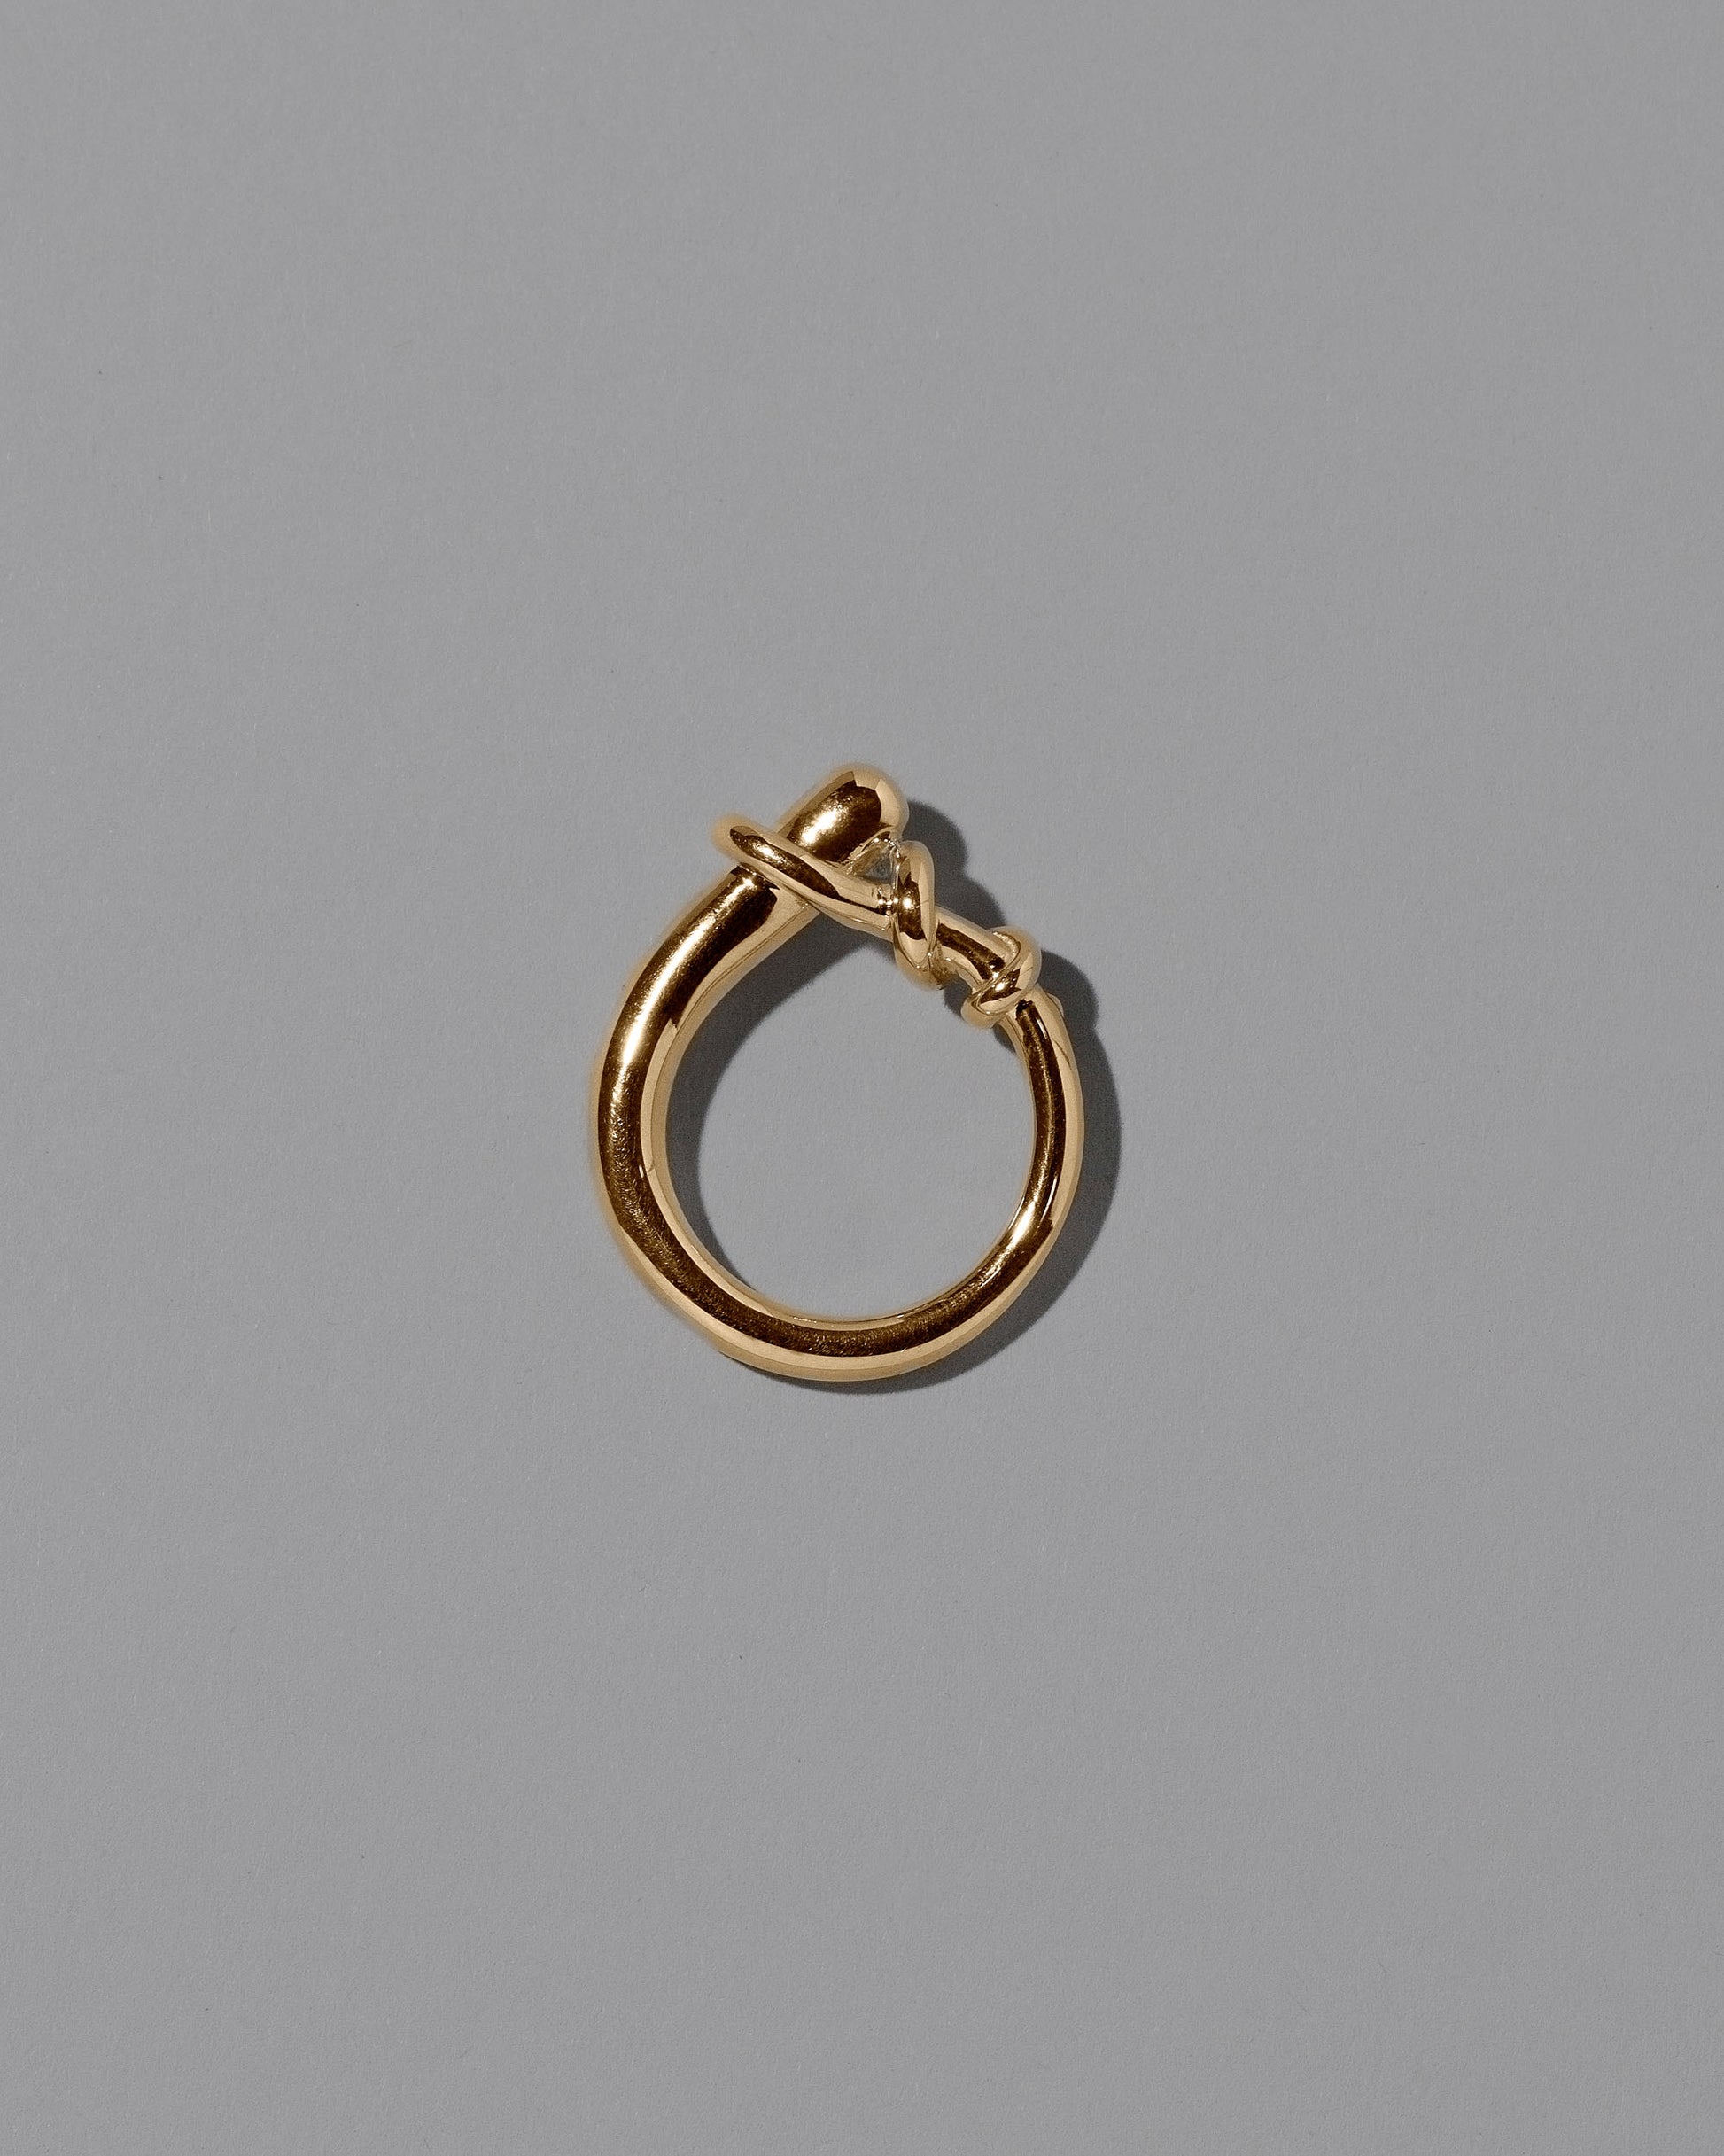 View from the side the of the CRZM 22k Gold Terrane Ring on light color background.